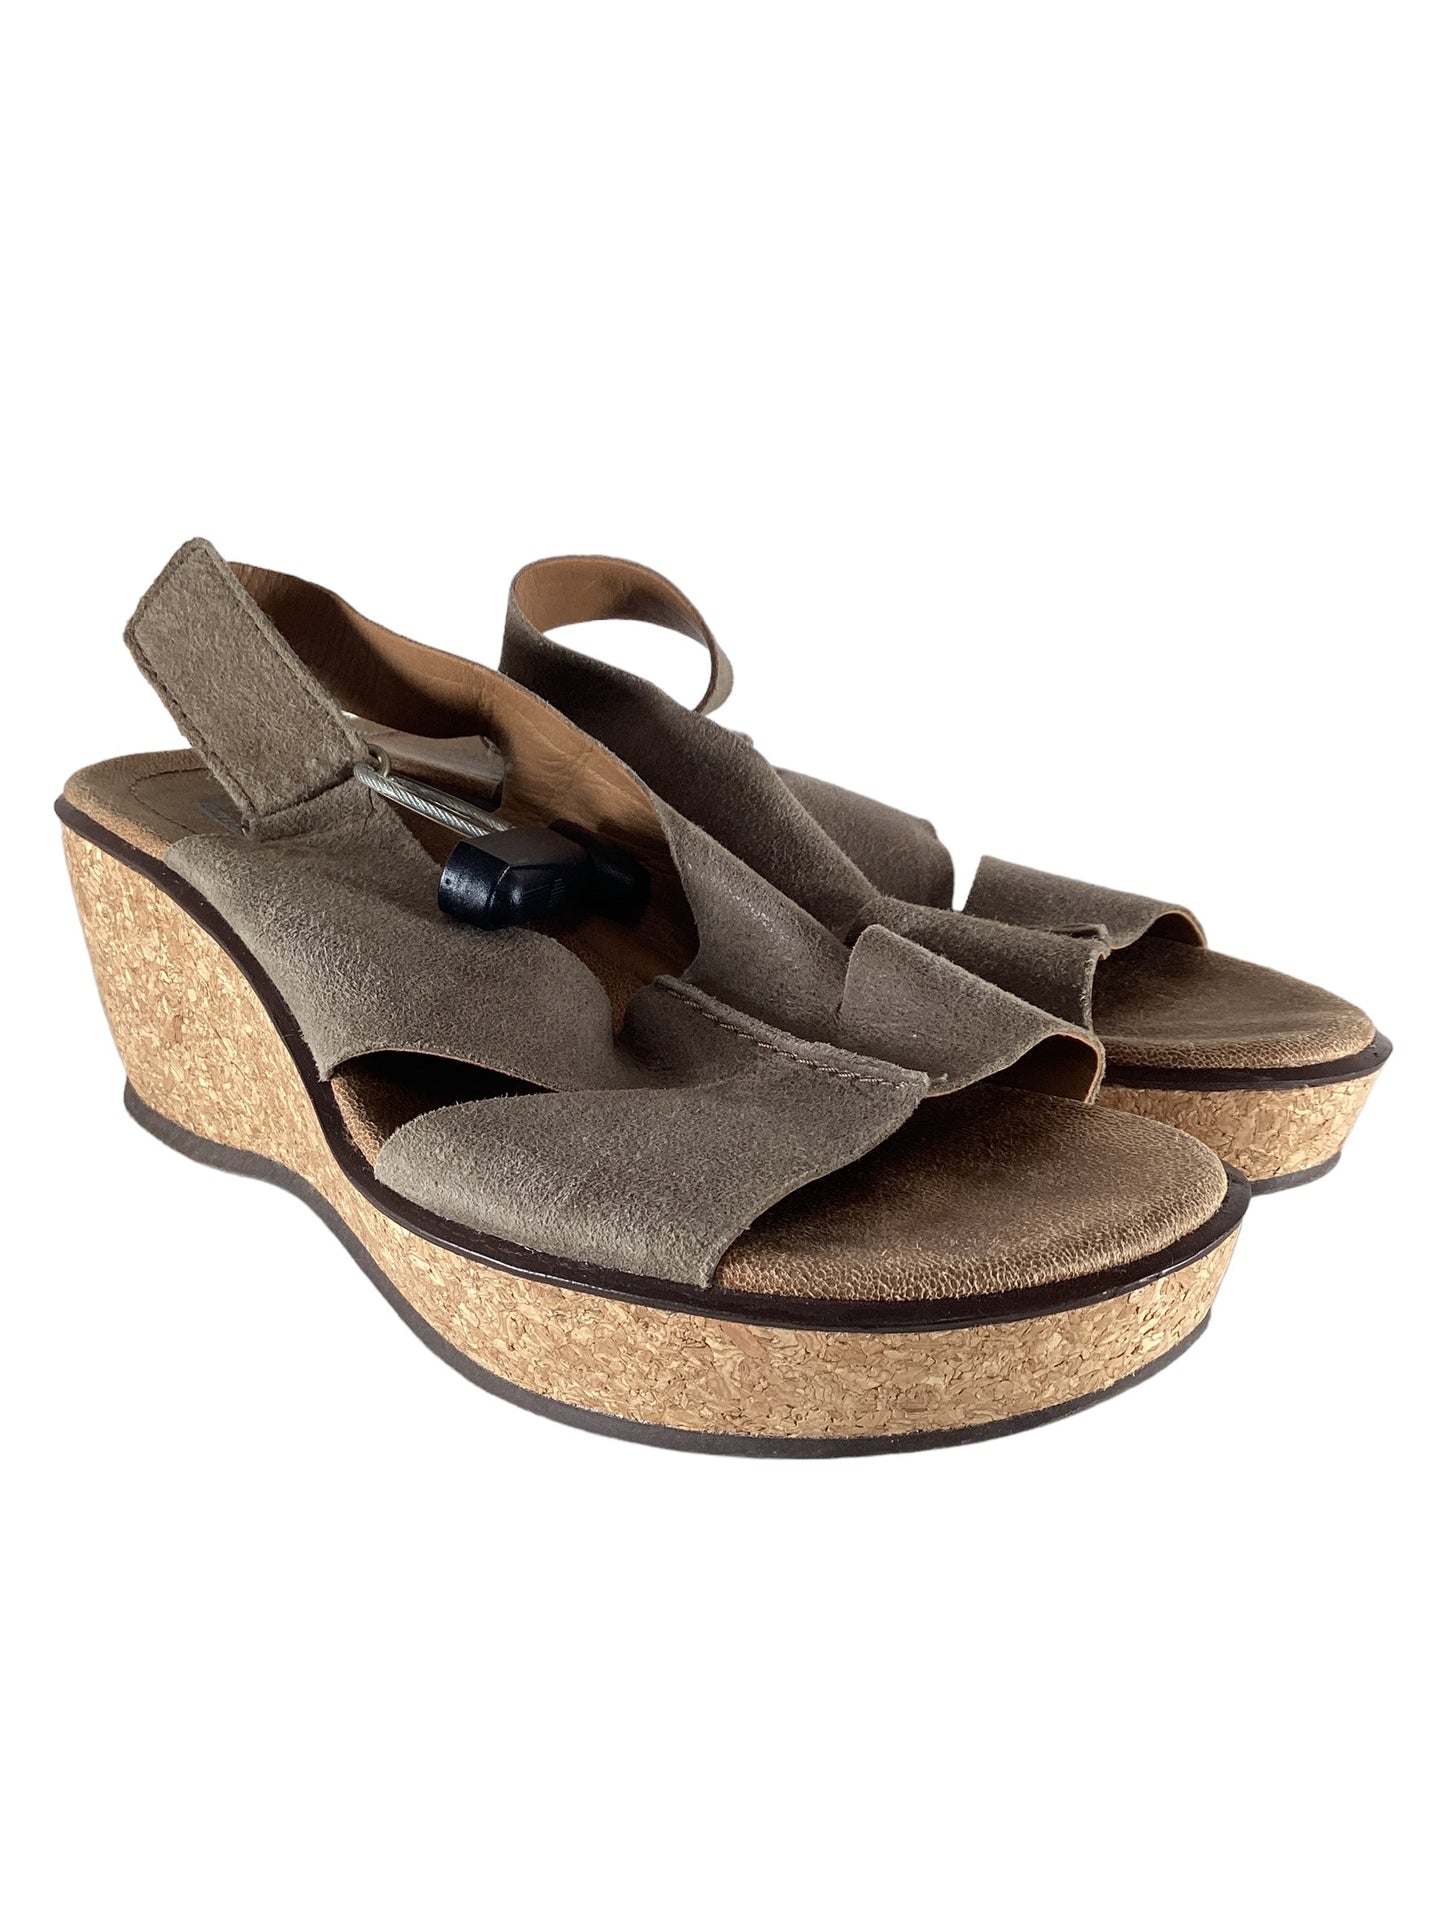 Sandals Heels Wedge By Clarks  Size: 9.5